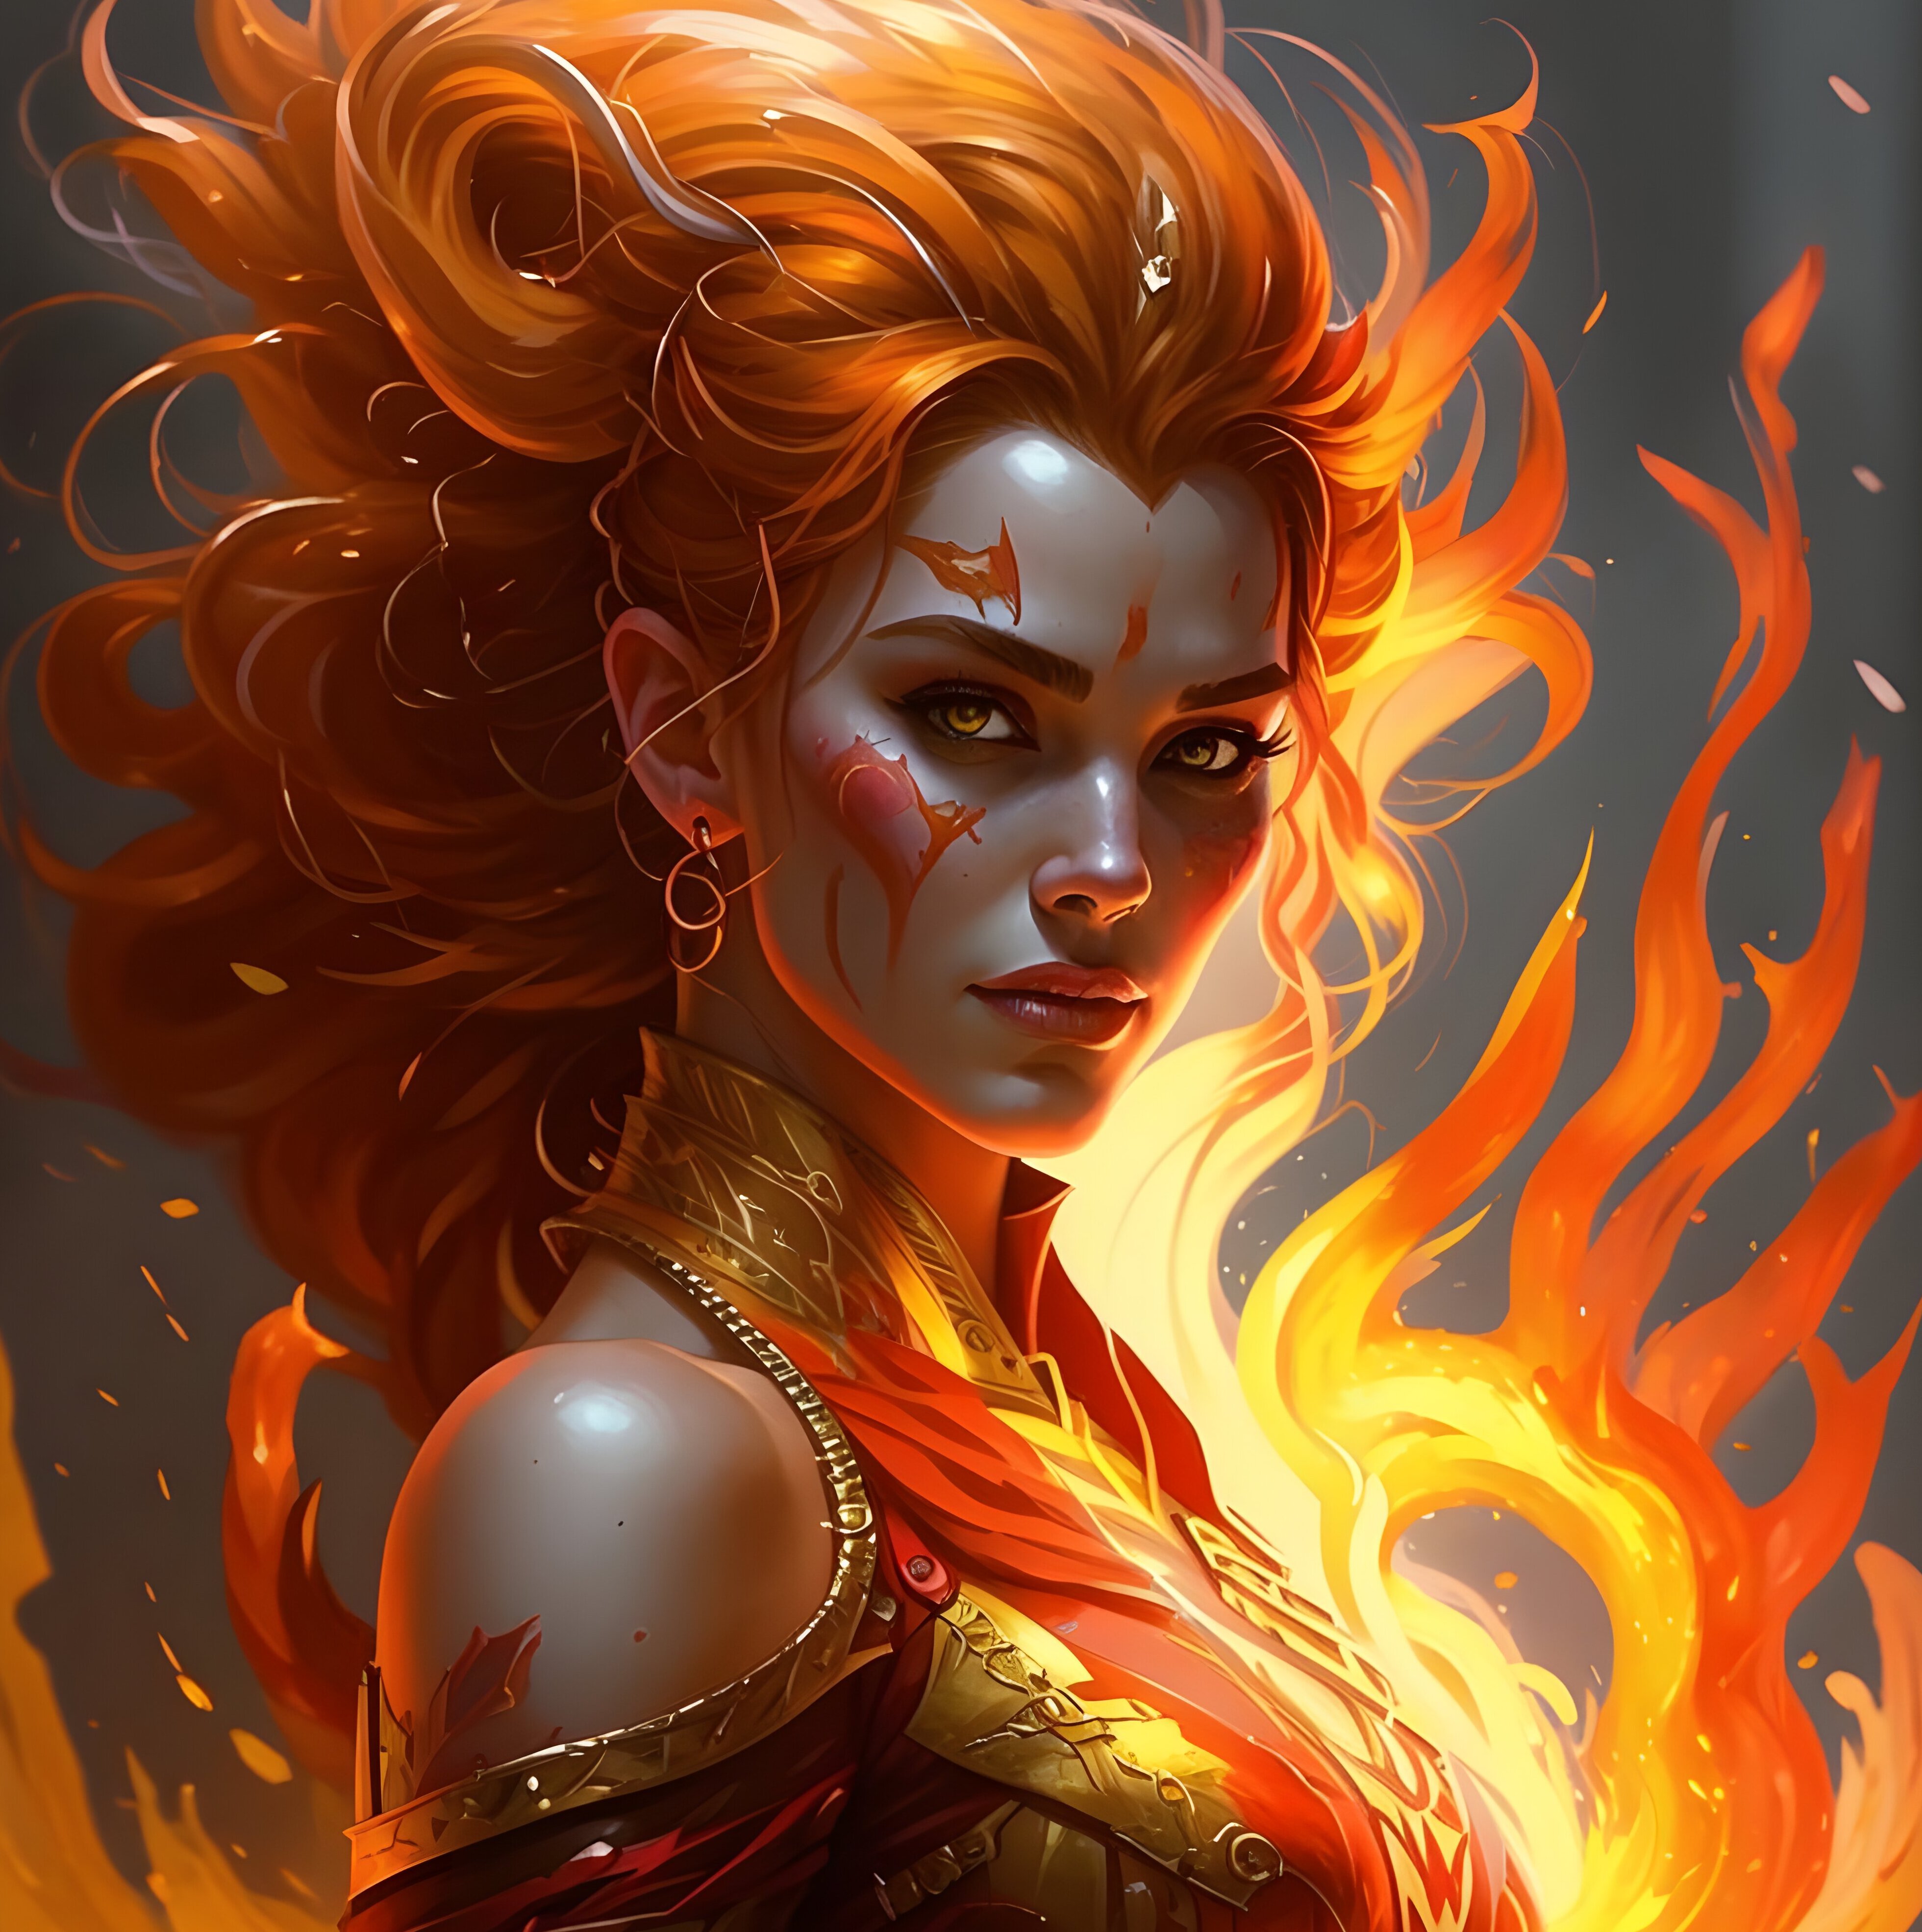 The girl is the spirit of fire.